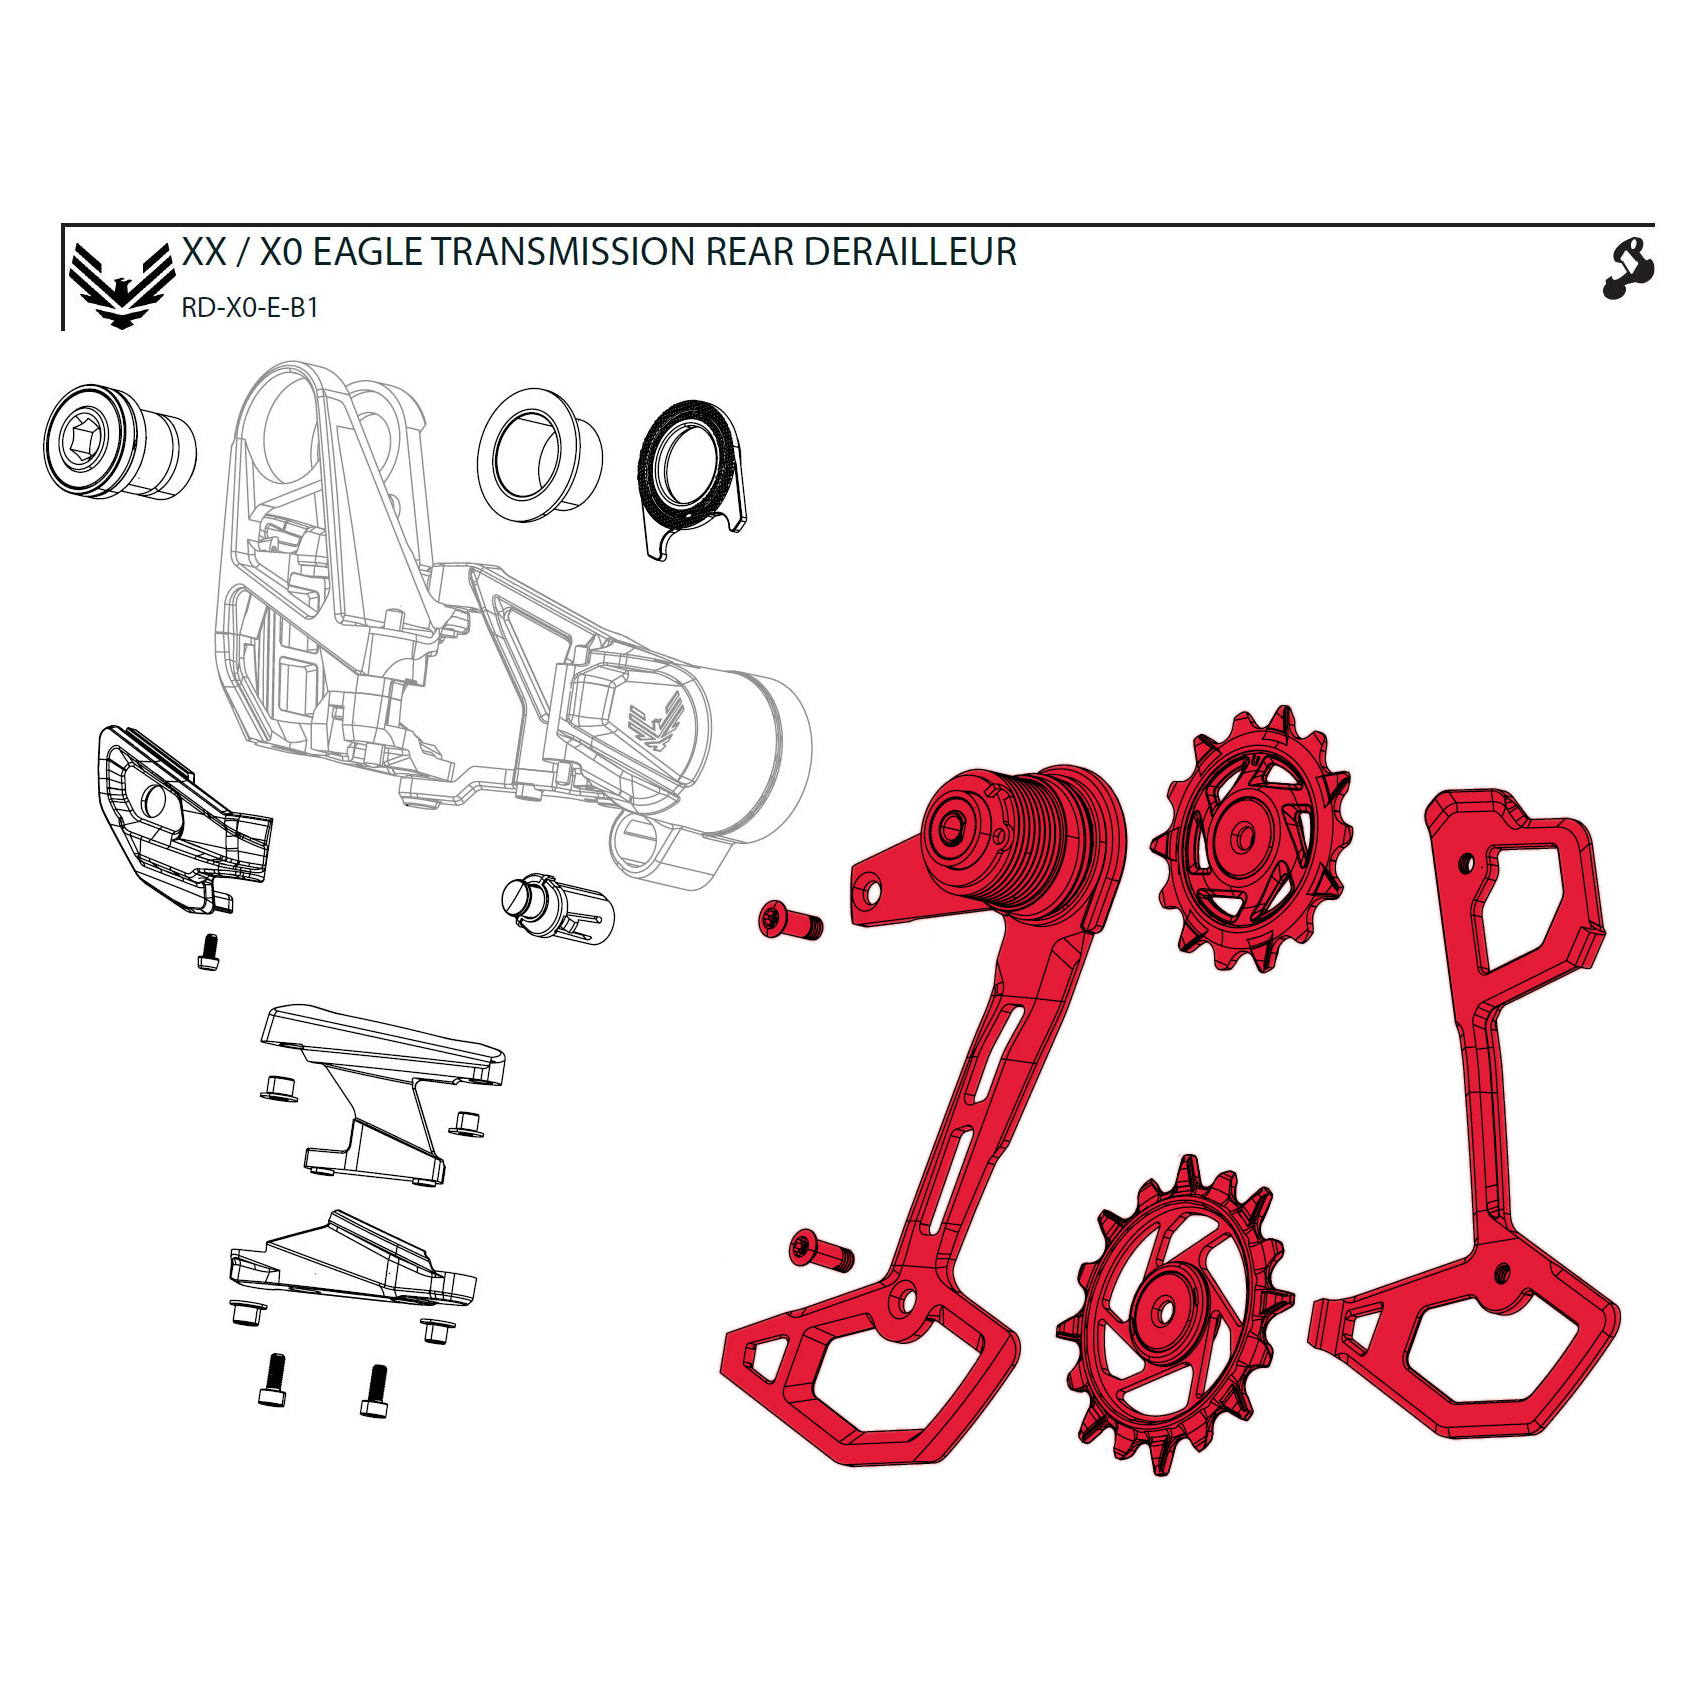 Picture of SRAM Cage Assembly Kit for X0 Eagle Rear Derailleur - AXS | T-Type | B1 - 11.7518.104.012